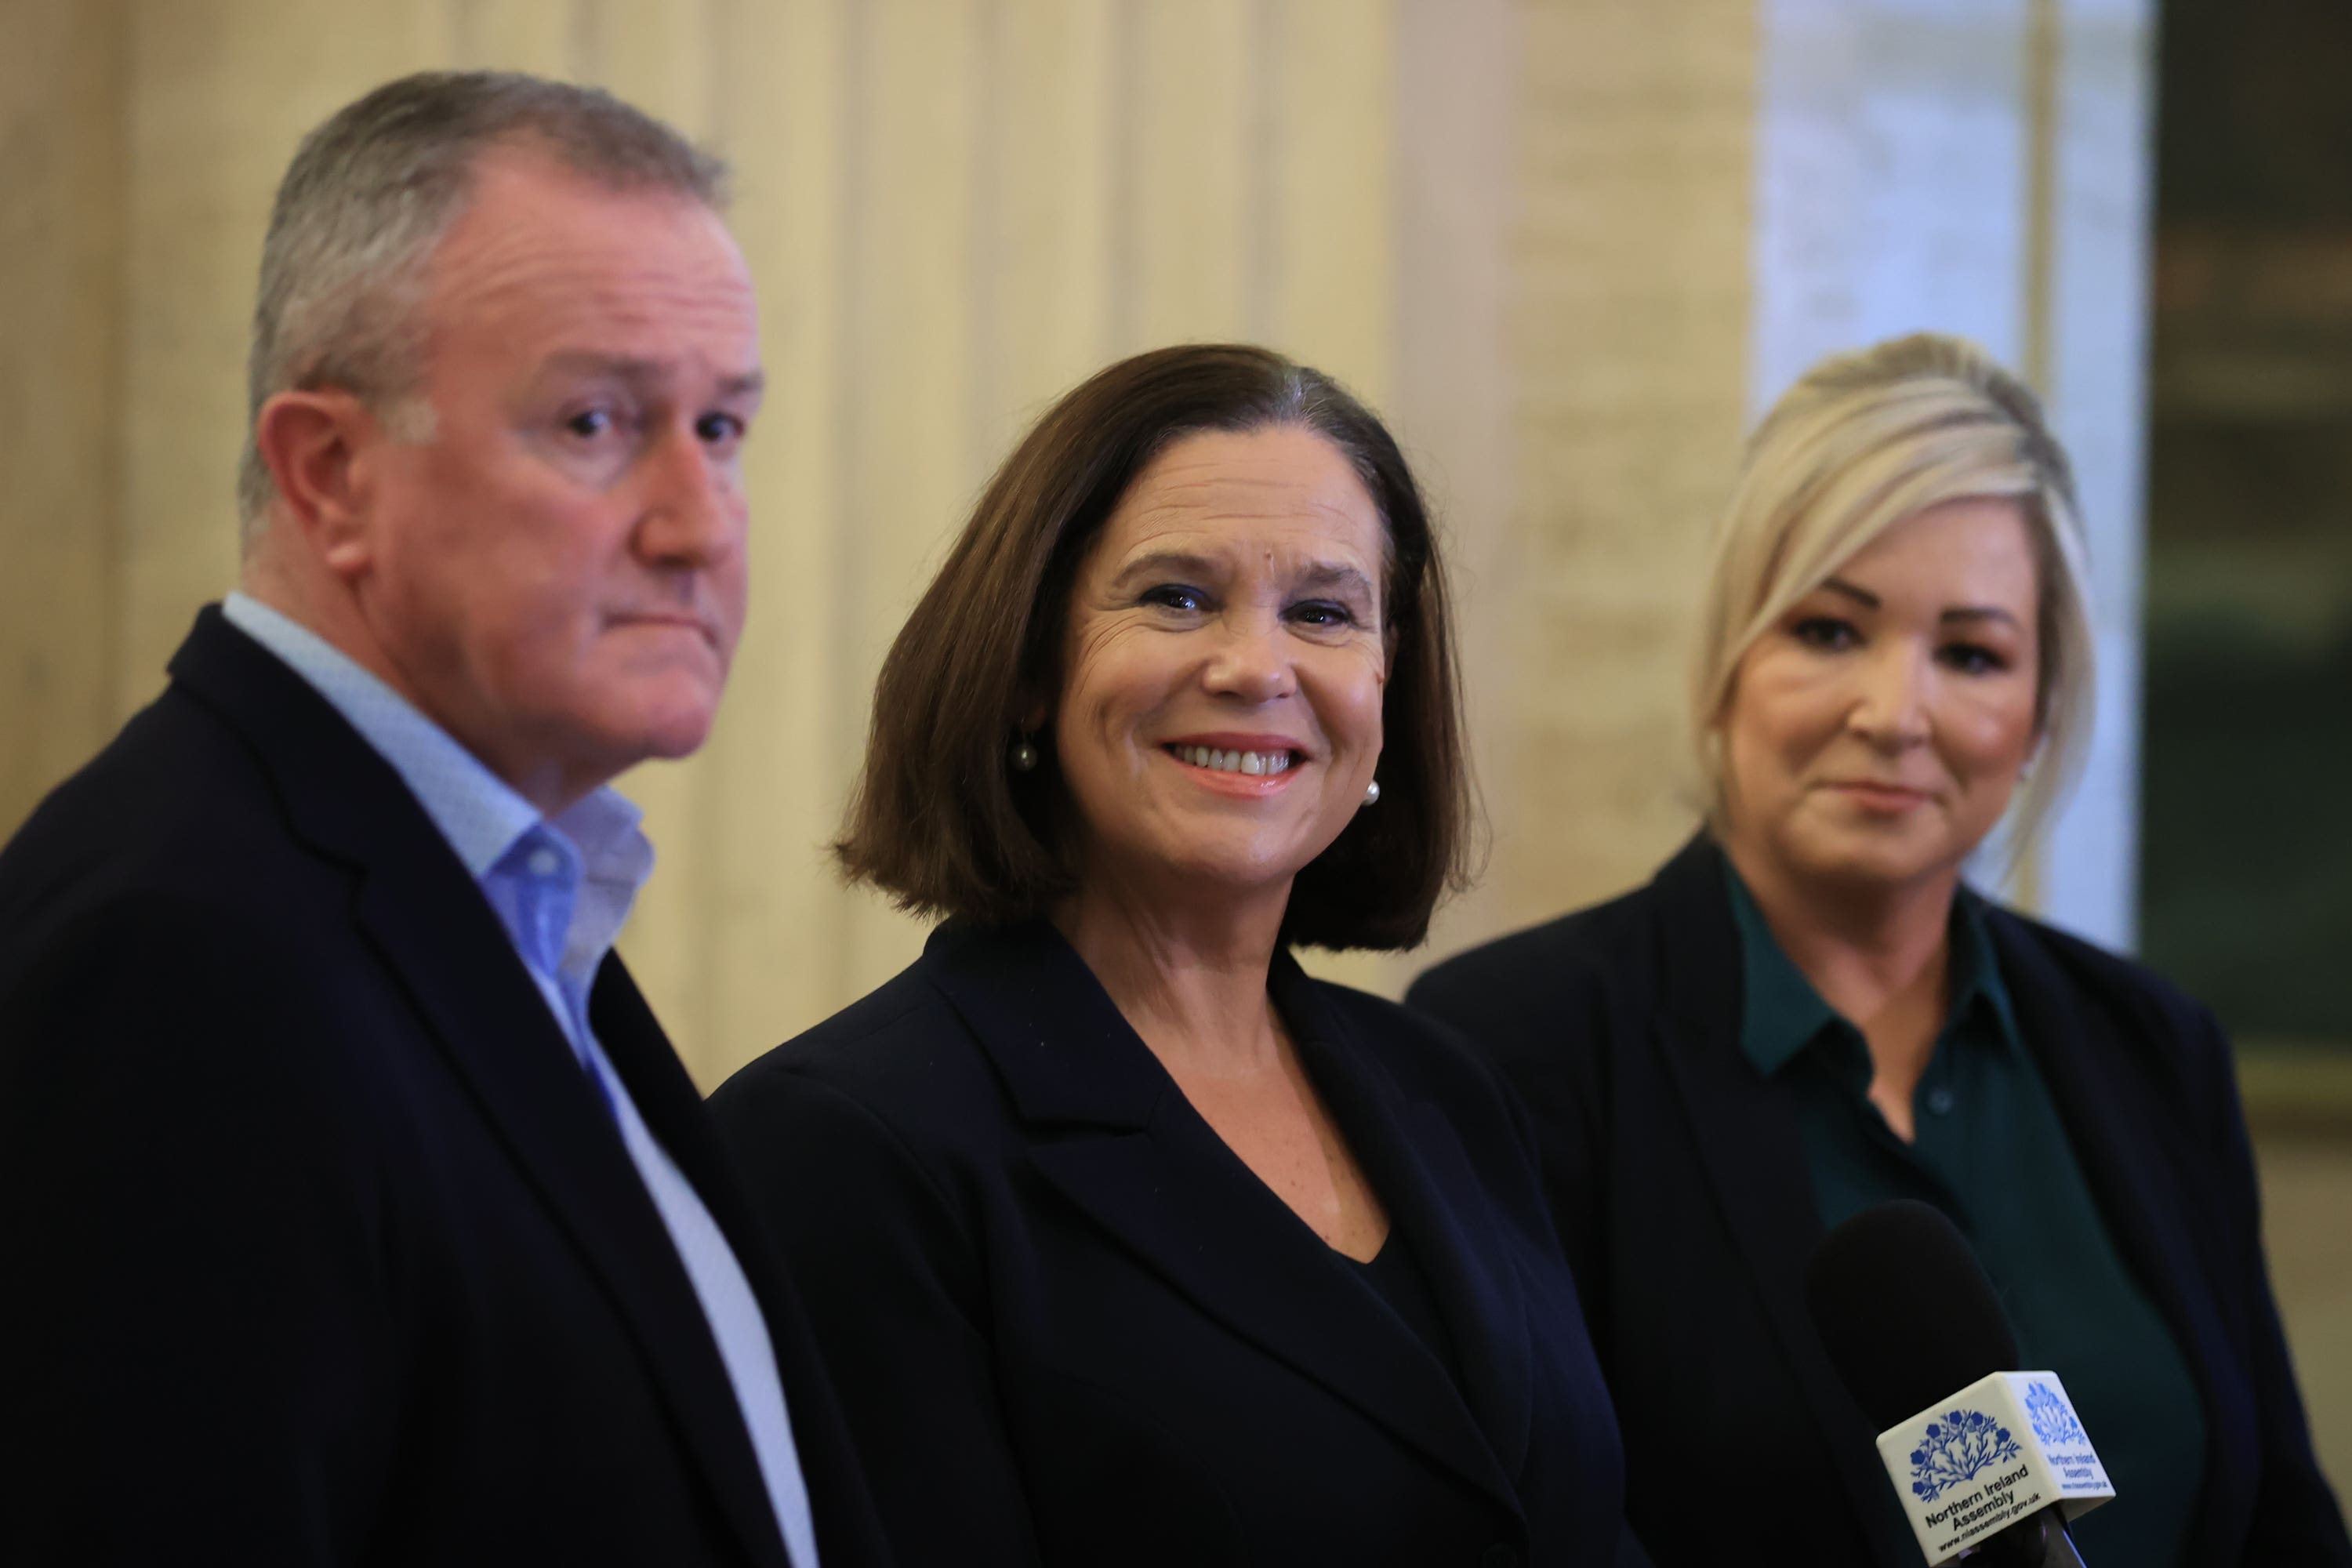 As Sinn Fein won the most seats in the last assembly elections, its vice-president Michelle O’Neill will become first minister later this week